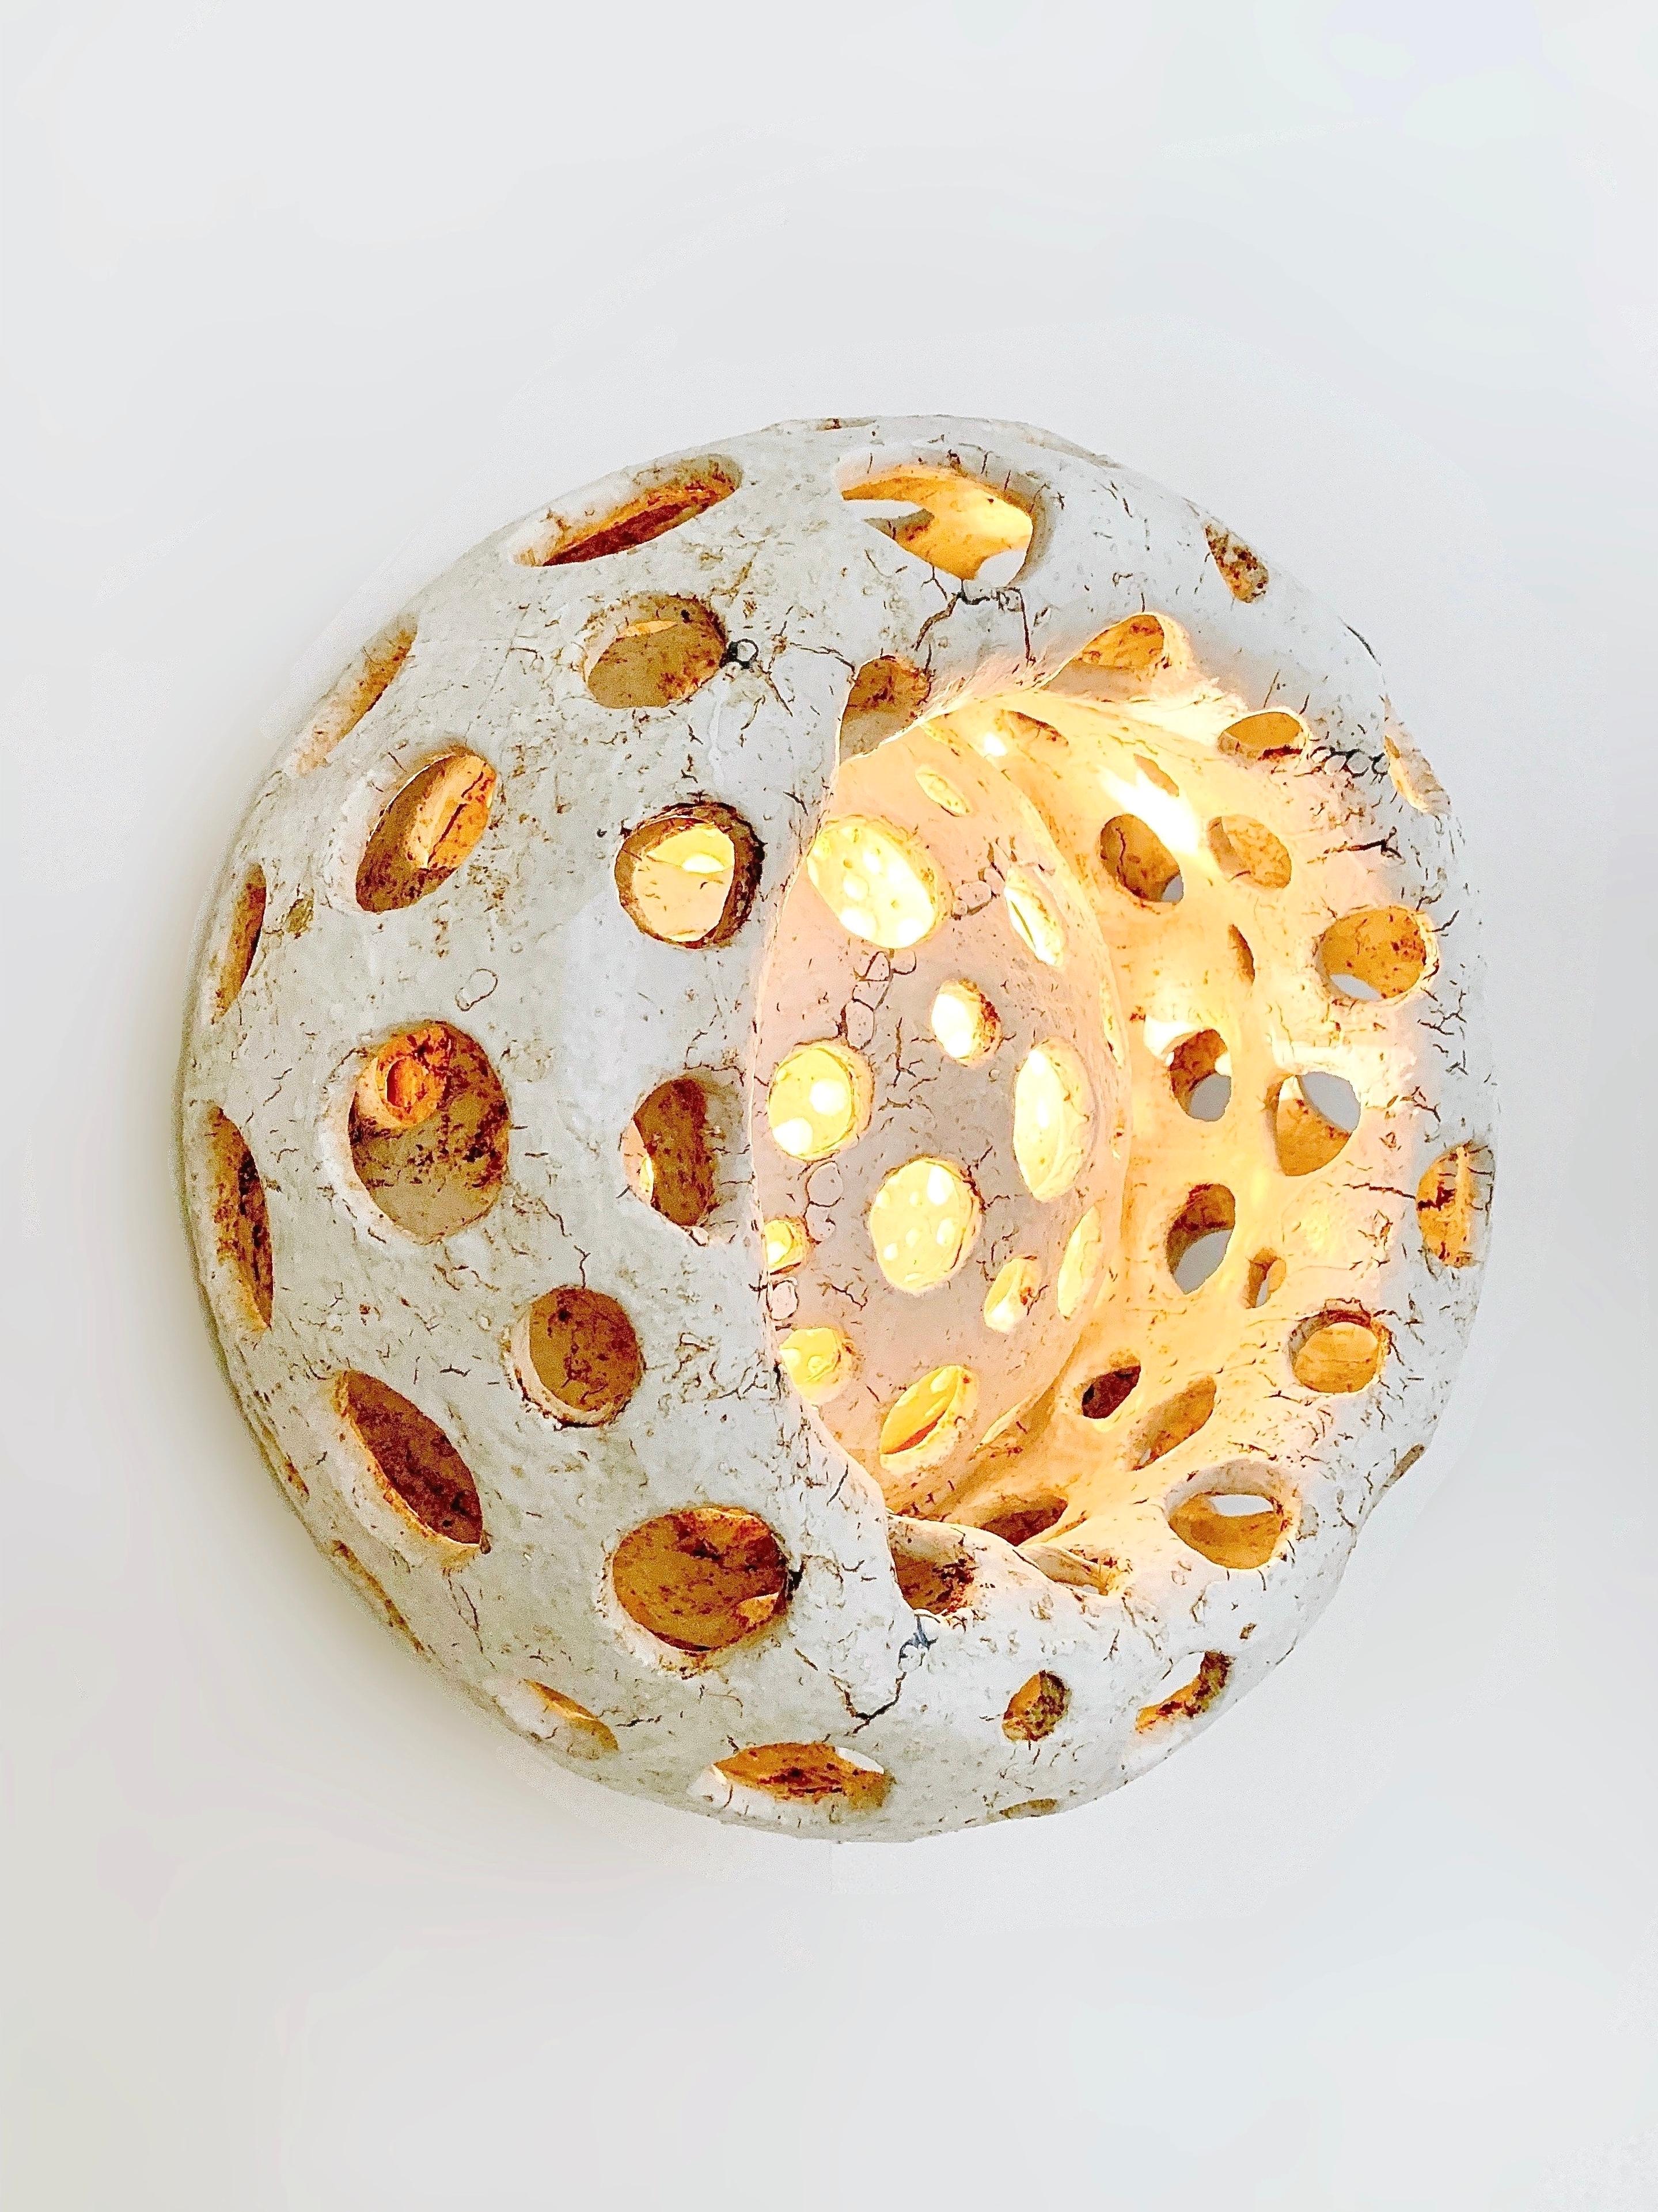 “Baba” wall lights by Agnès Debizet, 2020
______
Pair of light openwork wall lights in sandstone and porcelain engobe, mosaic elements. Unique pieces, signed.
______
Dimensions: Ø 38cm
______
Born in Marseille, Agnès Debizet first started